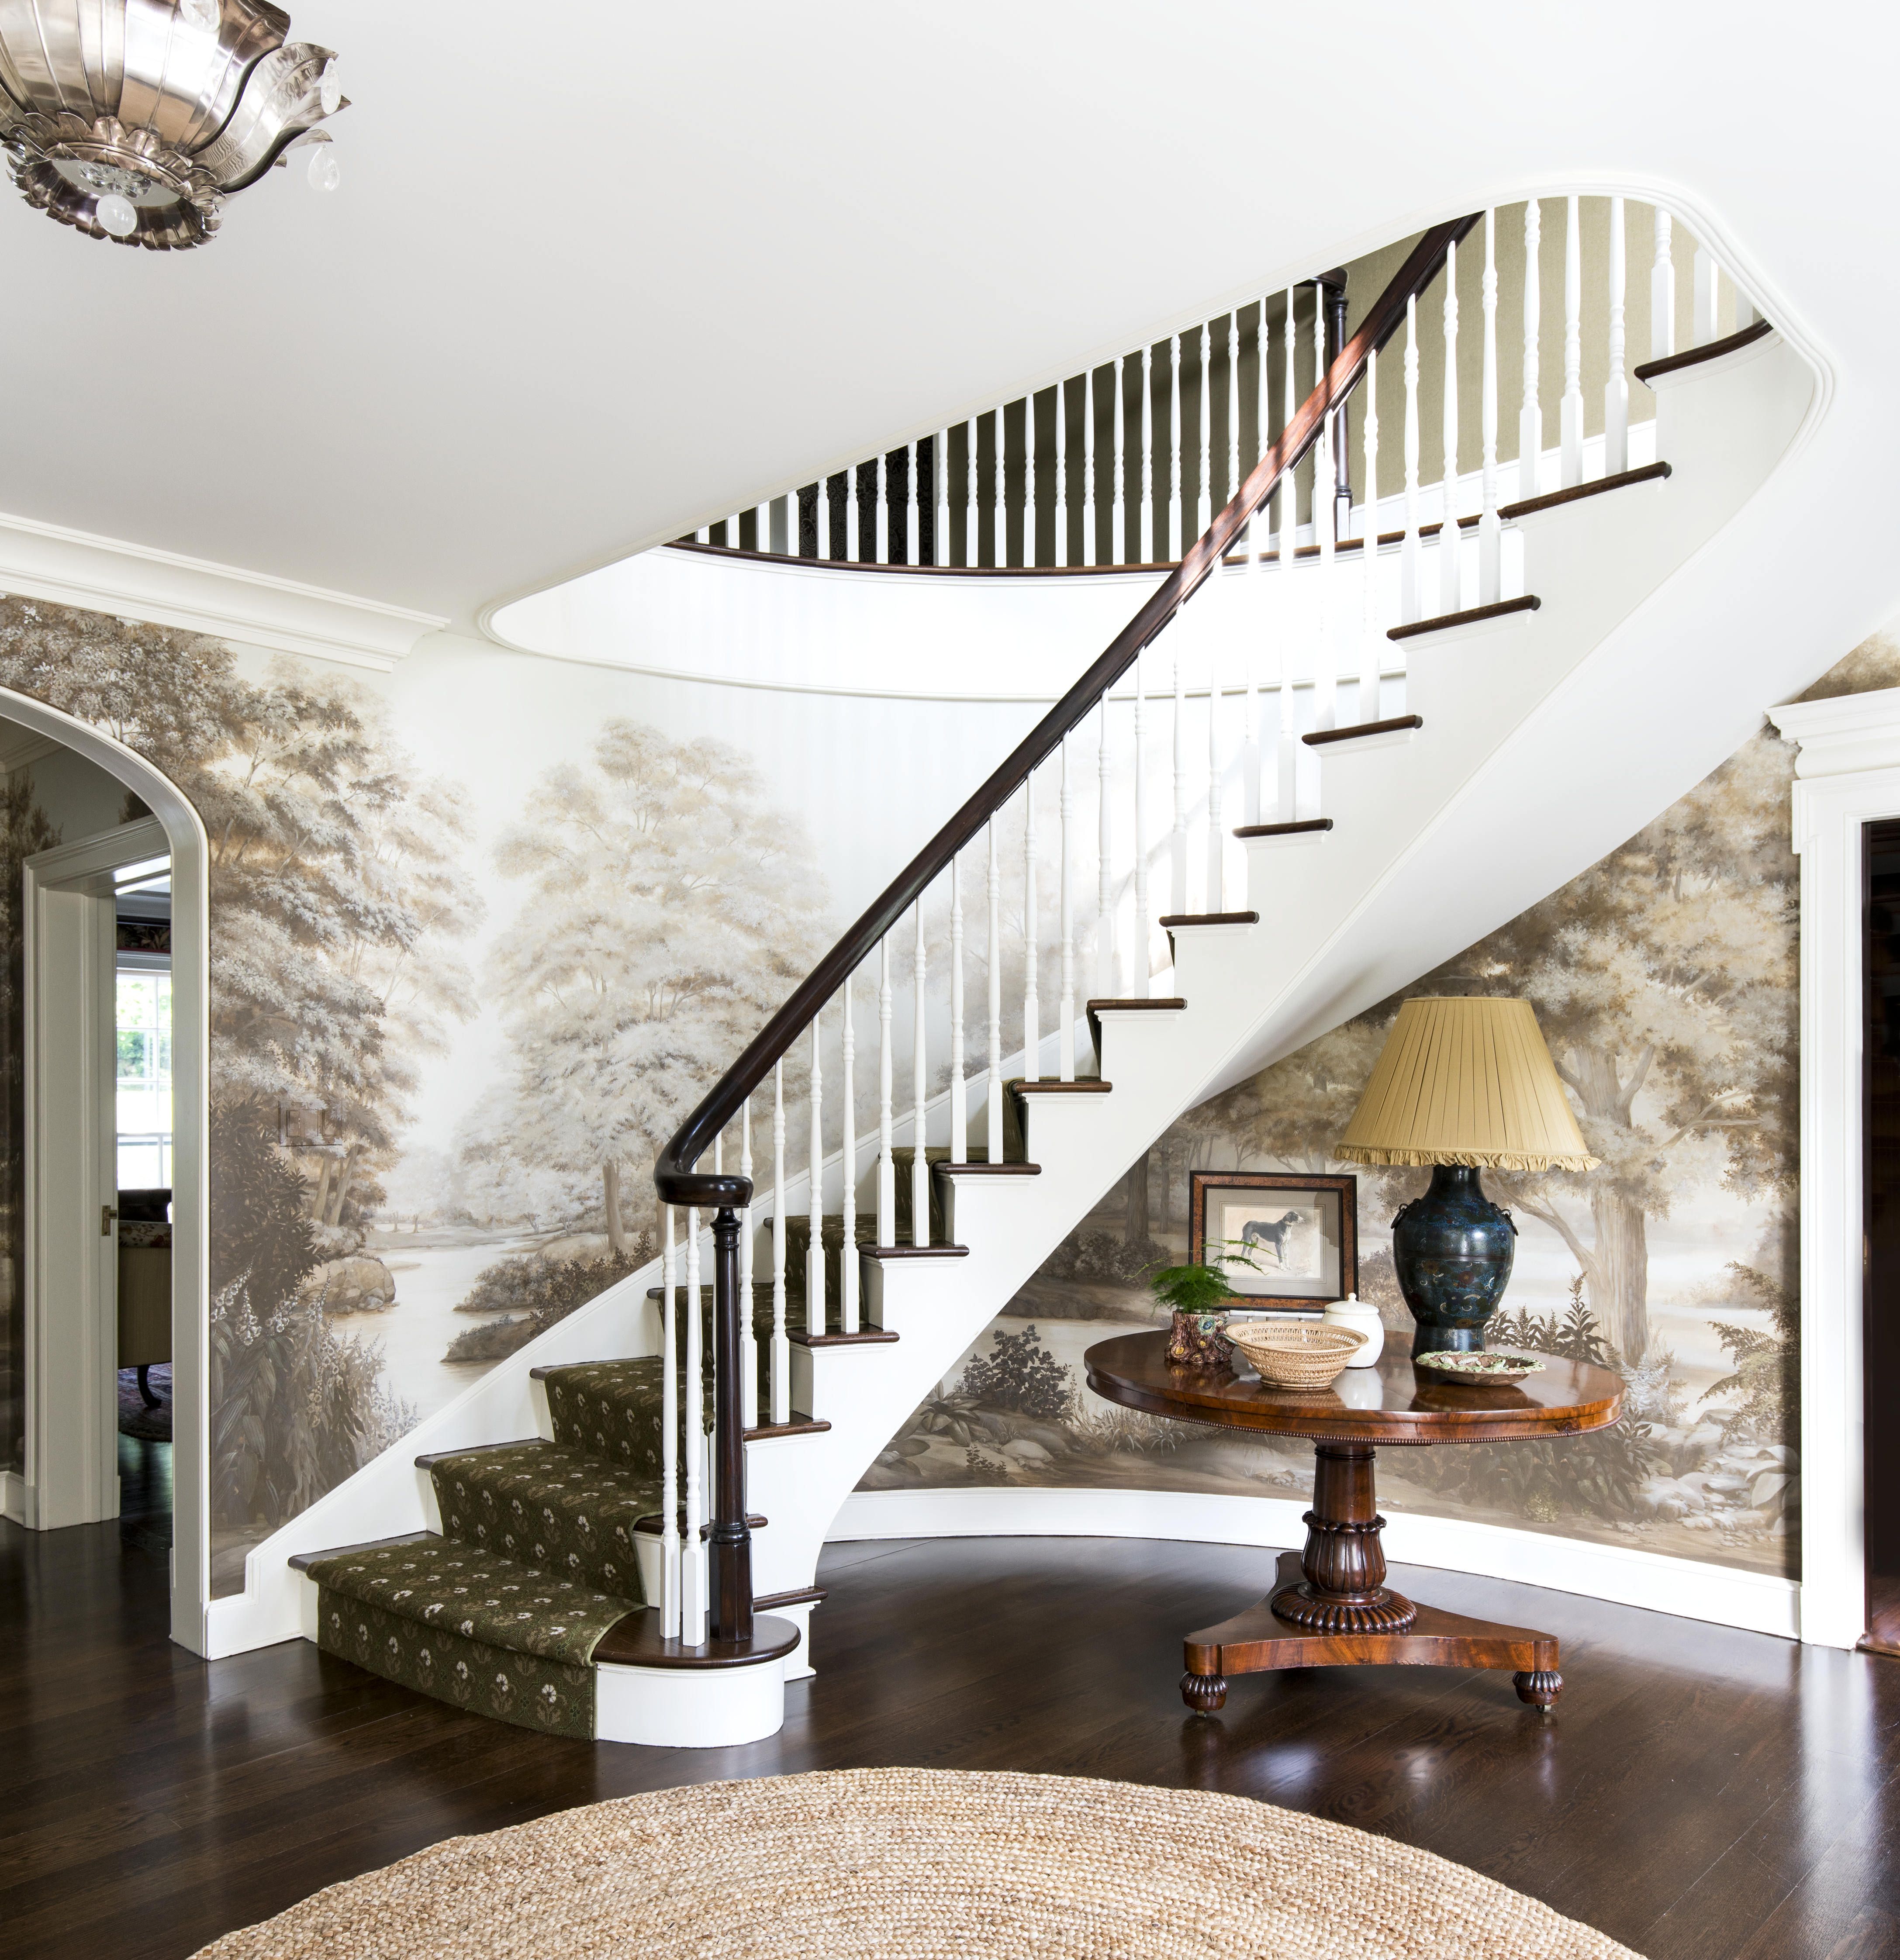 a sweeping staircase in an entry with a sepia toned mural on the curved walls